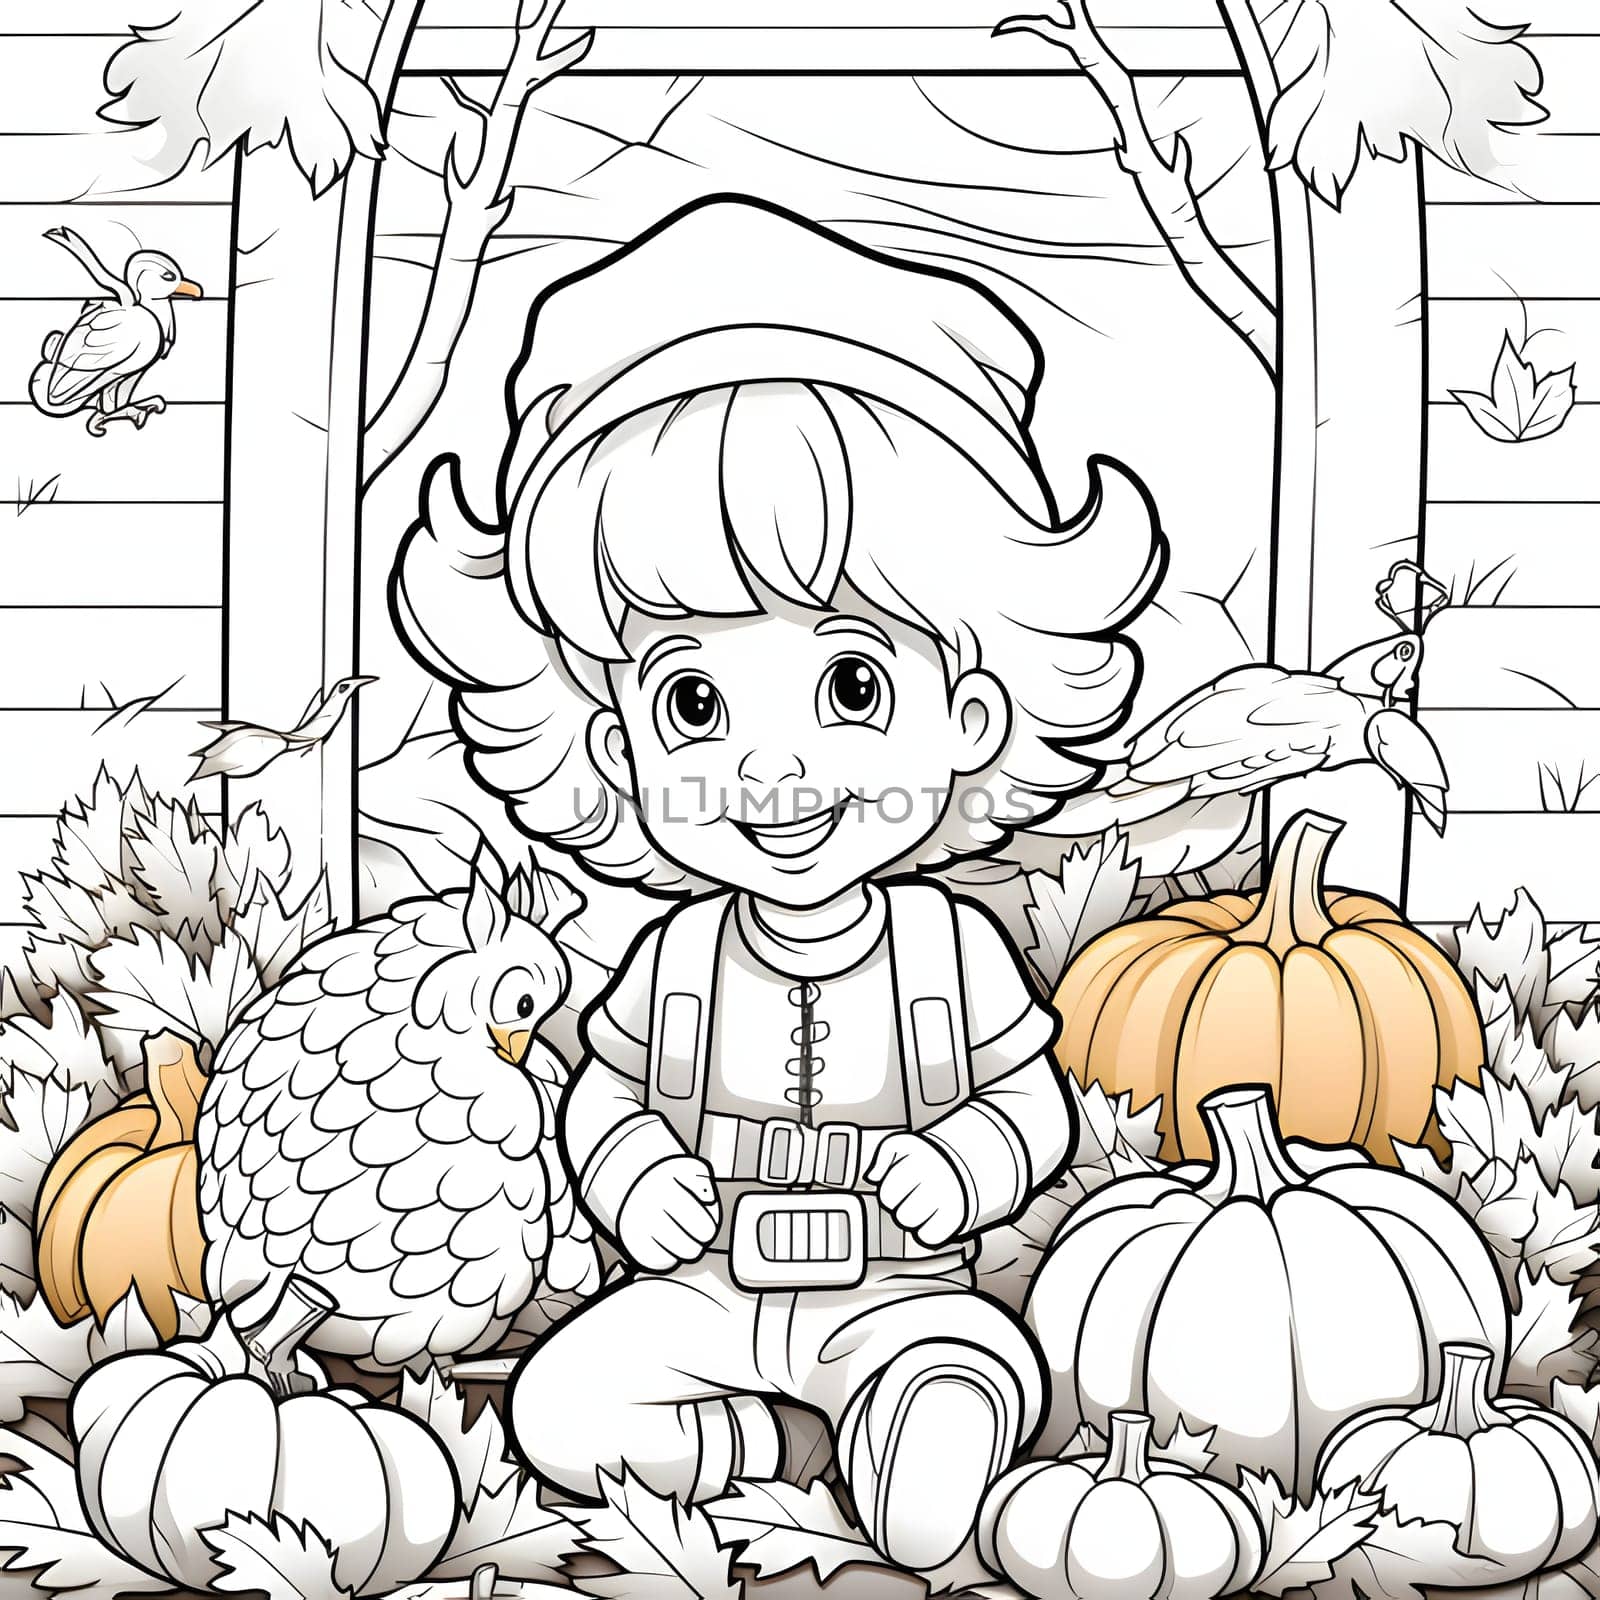 Black and White coloring sheet smiling boy with pumpkins and turkey. Pumpkin as a dish of thanksgiving for the harvest, picture on a white isolated background. An atmosphere of joy and celebration.